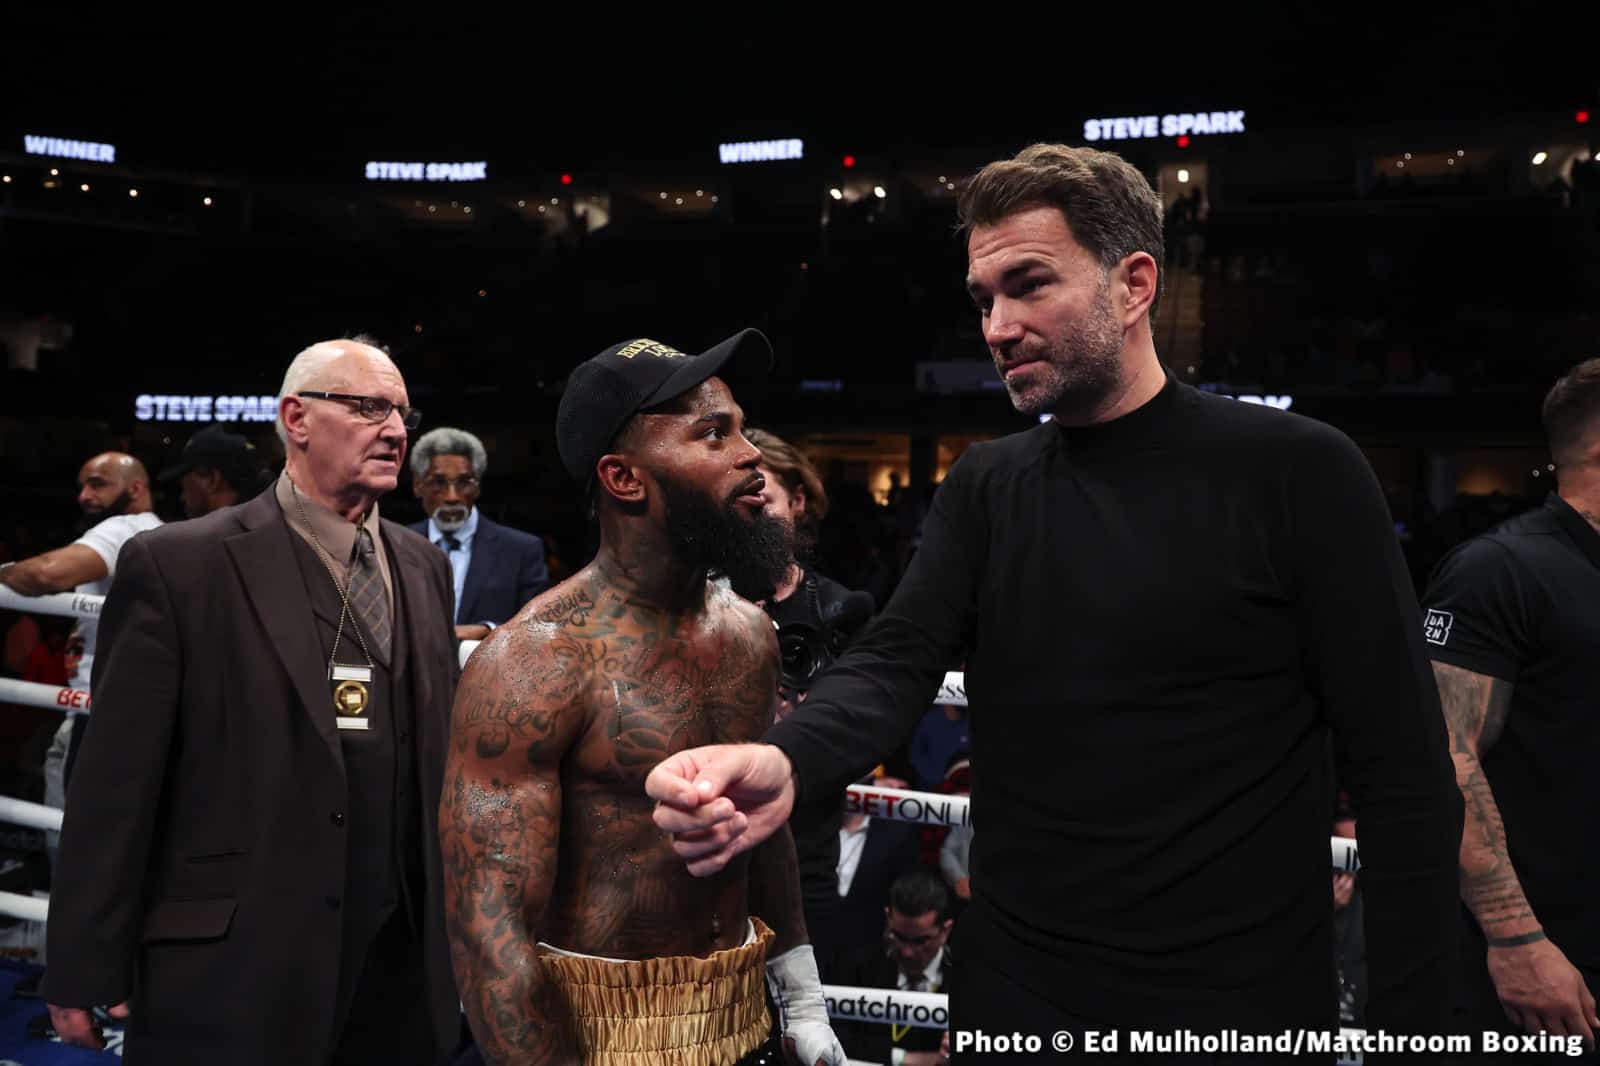 Image: Eddie Hearn denies Montana Love intentionally threw Steve Spark out of ring